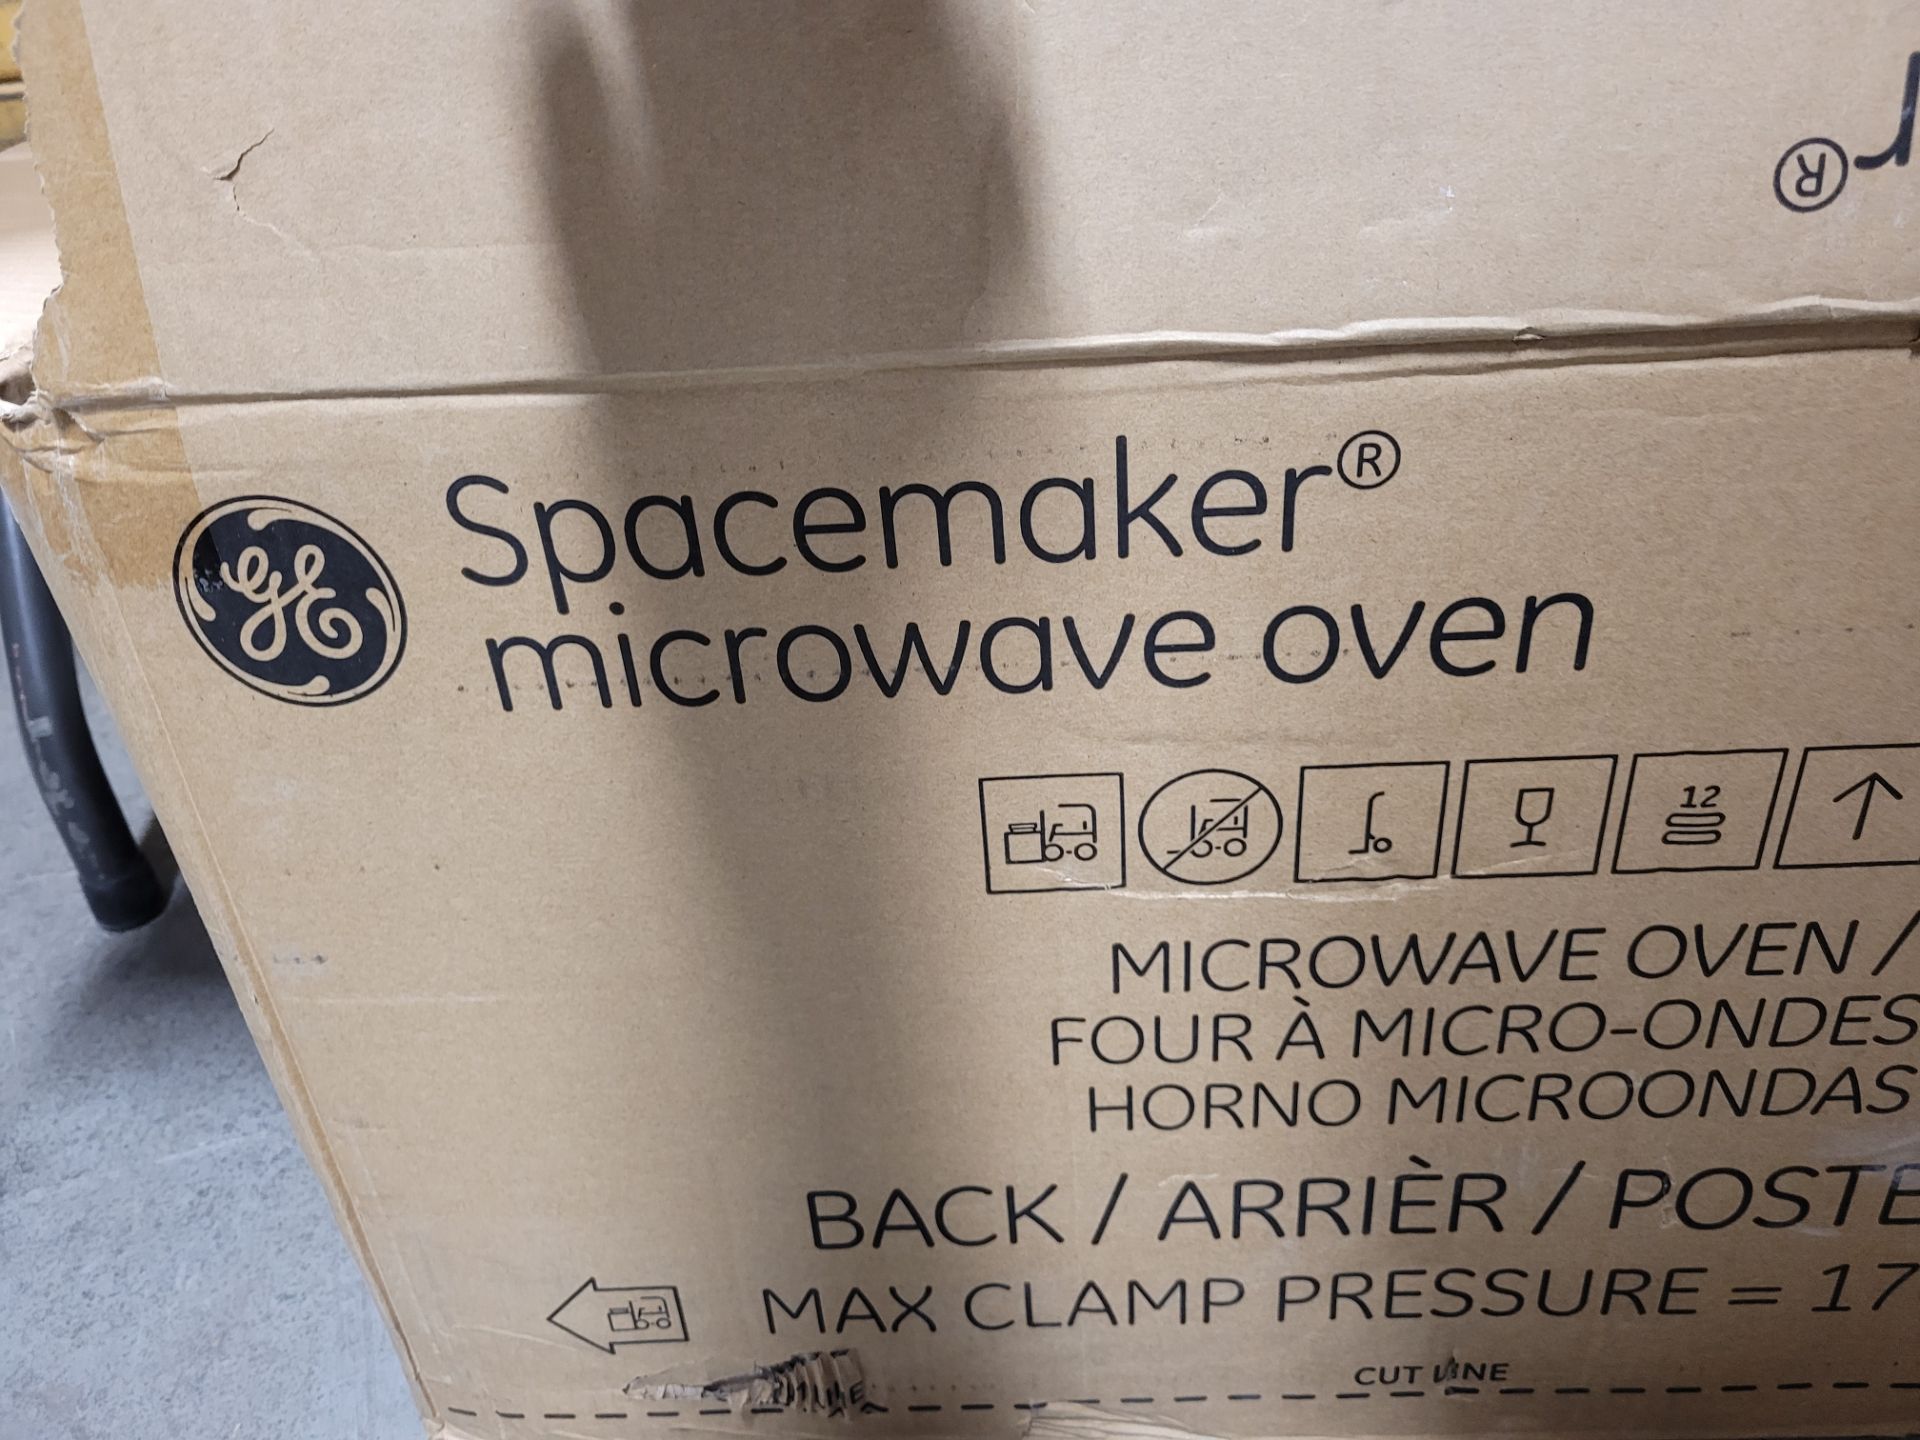 GE mod. Spacemaker microwave oven, with box, 13" x 24" x 13", 33lbs - Image 2 of 3